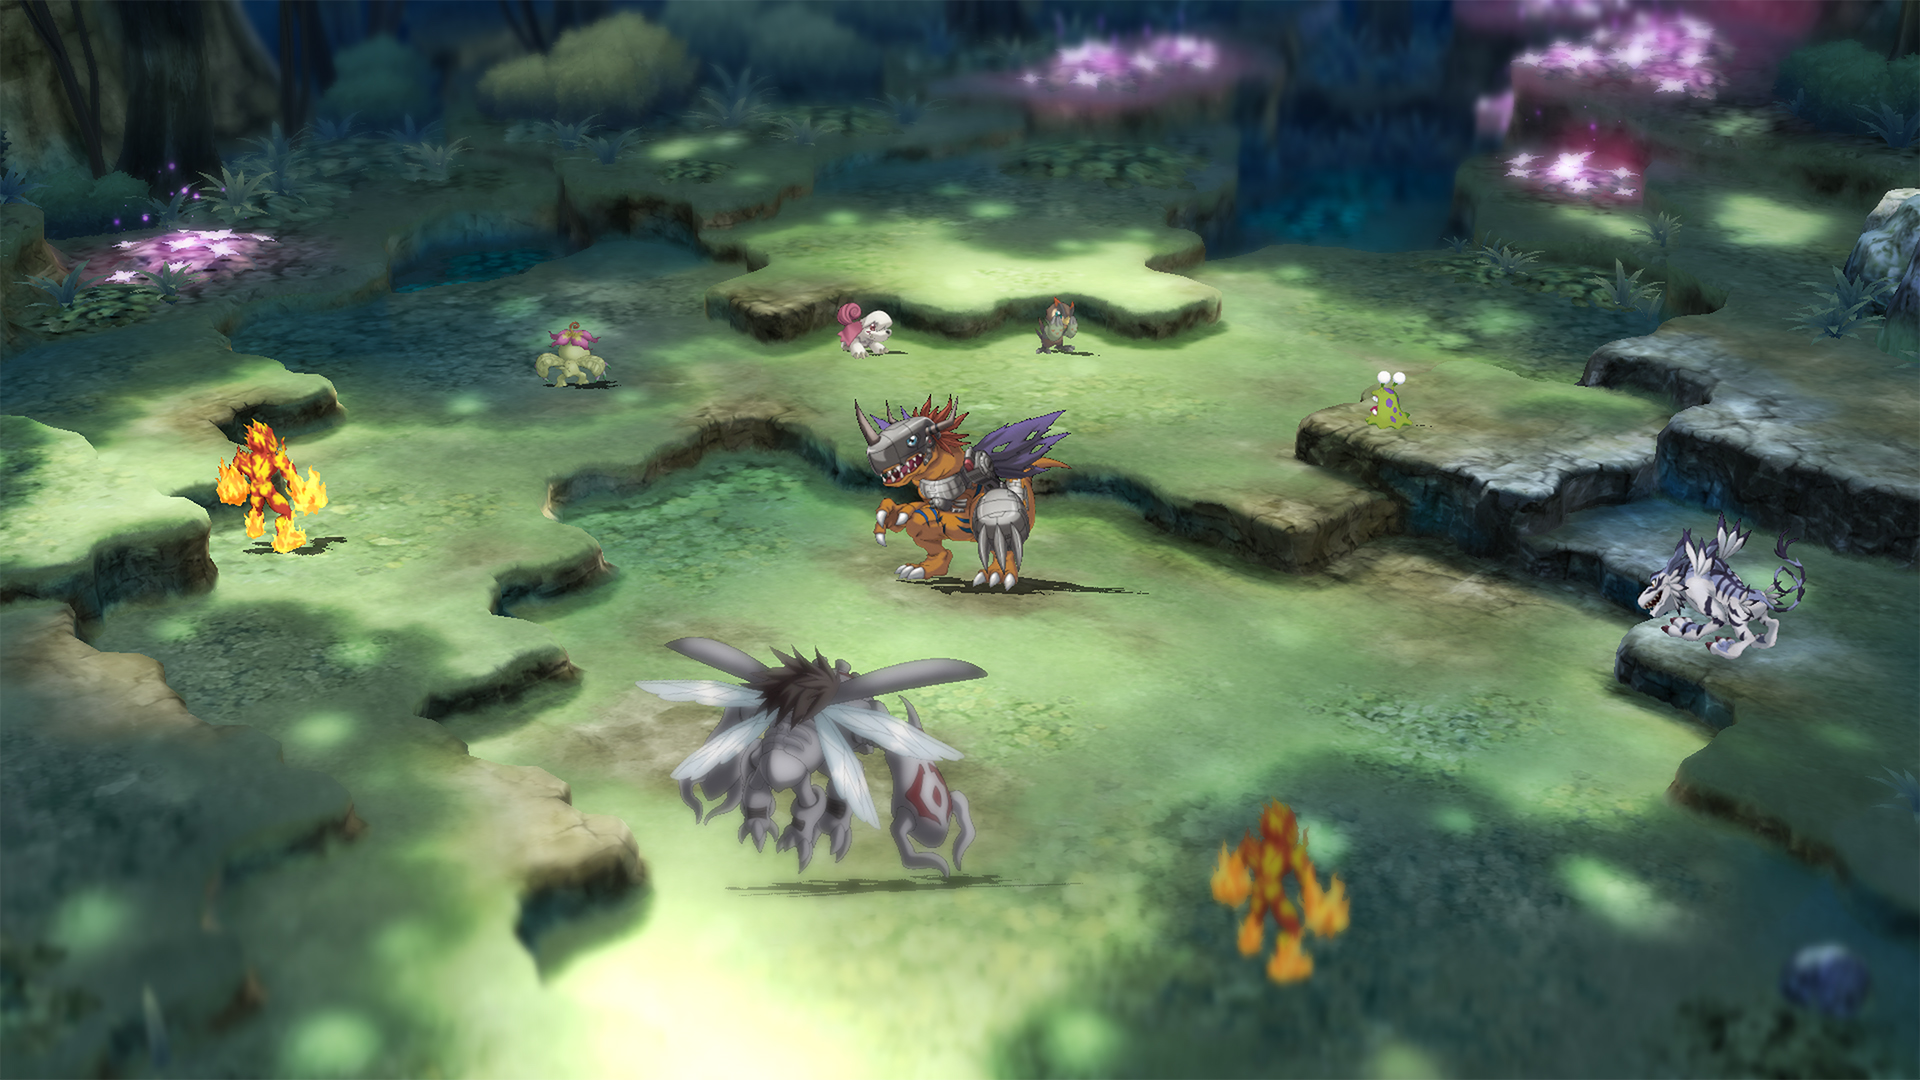 Digimon Survive trailer goes over exploration, conversations, and battles